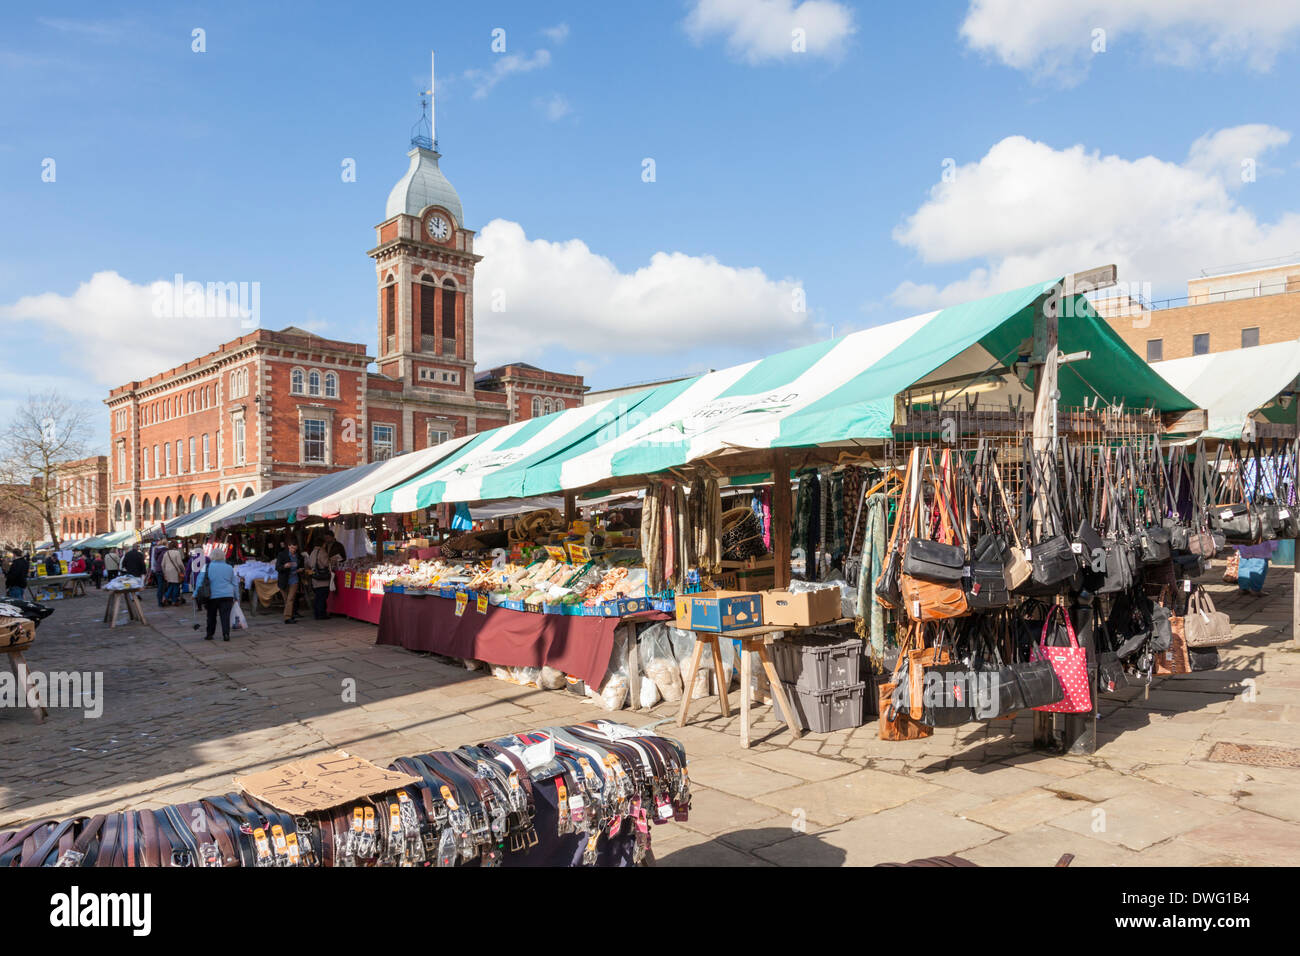 Outdoor market stalls. Leather goods on sale at Chesterfield Market with the Market Hall in the distance. Chesterfield, Derbyshire, England, UK Stock Photo